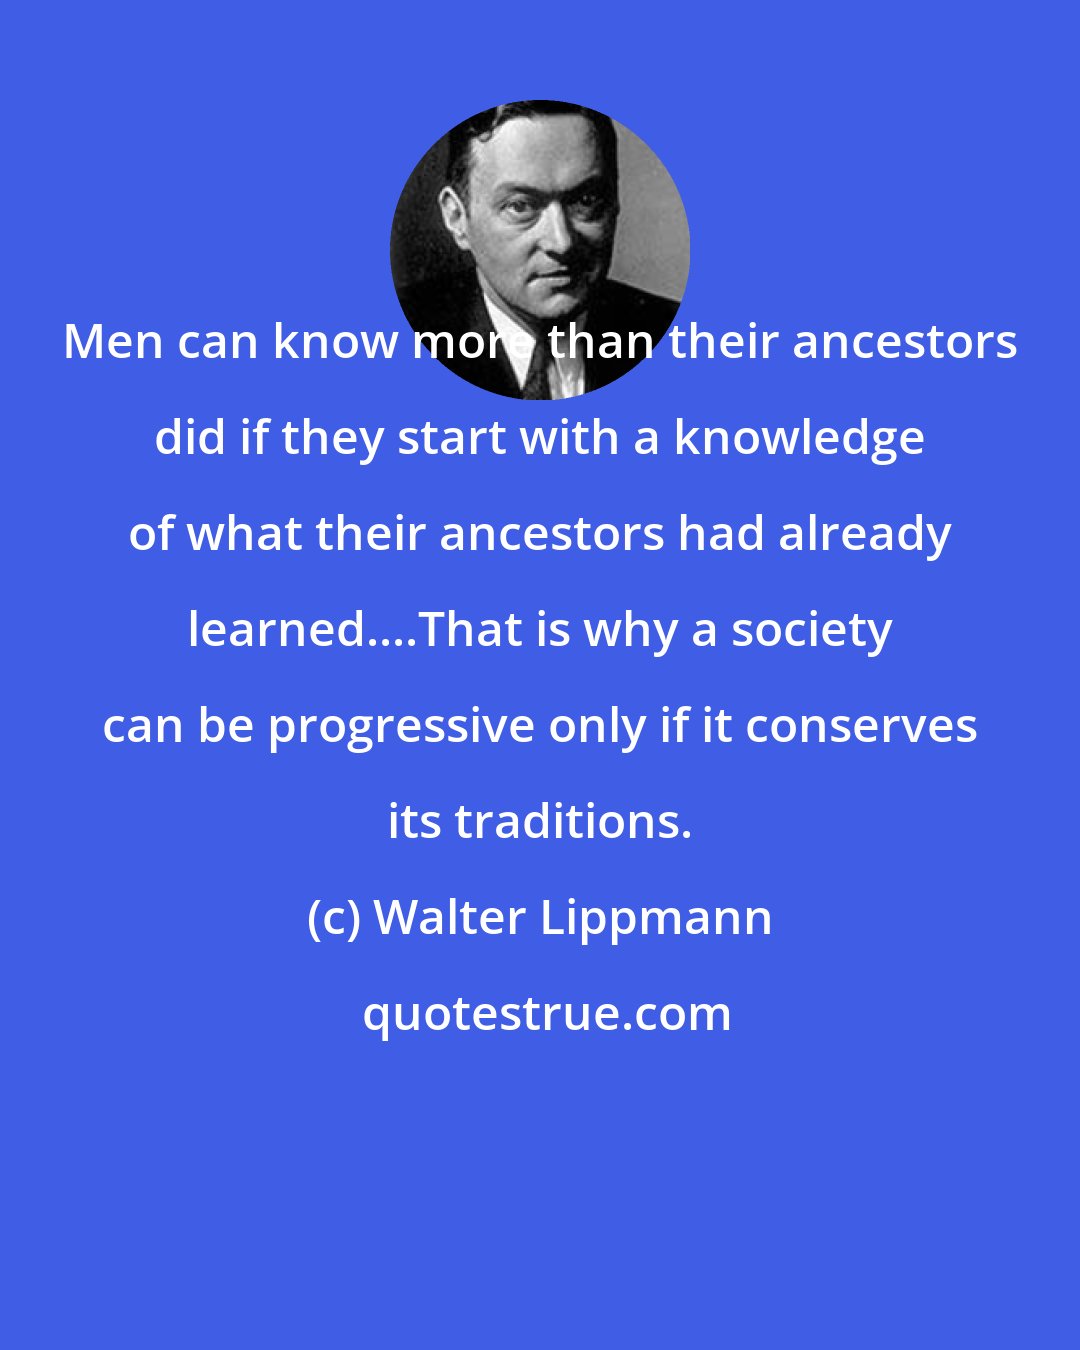 Walter Lippmann: Men can know more than their ancestors did if they start with a knowledge of what their ancestors had already learned....That is why a society can be progressive only if it conserves its traditions.